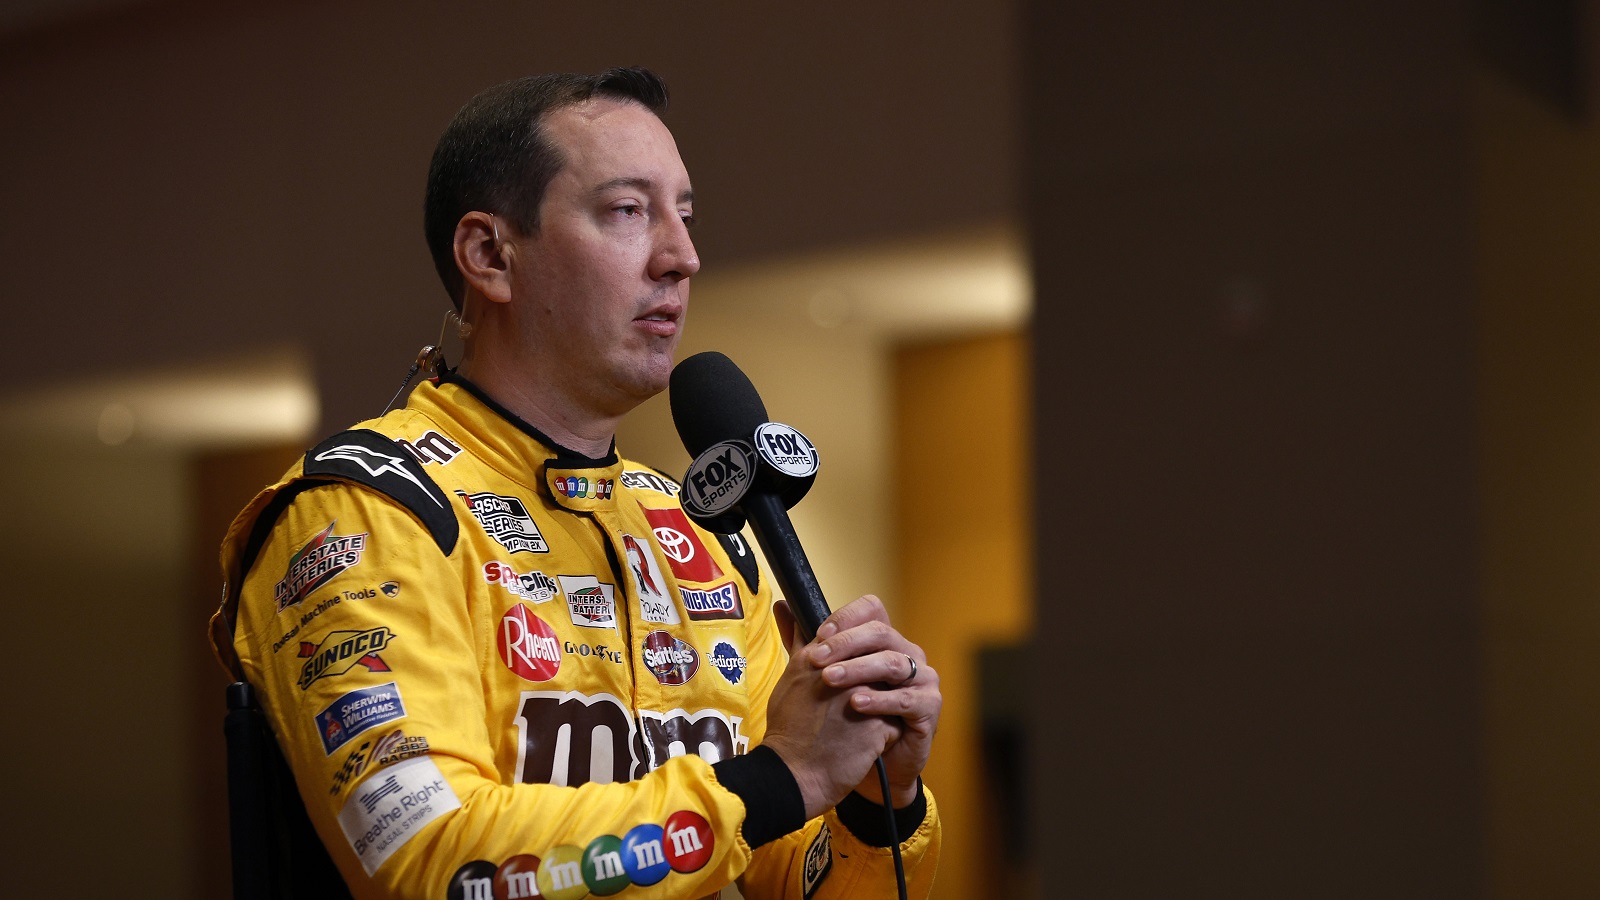 NASCAR driver Kyle Busch speaks with reporters during the NASCAR Cup Series Playoff Media Day at Charlotte Convention Center on Sept. 1, 2022. | Jared C. Tilton/Getty Images